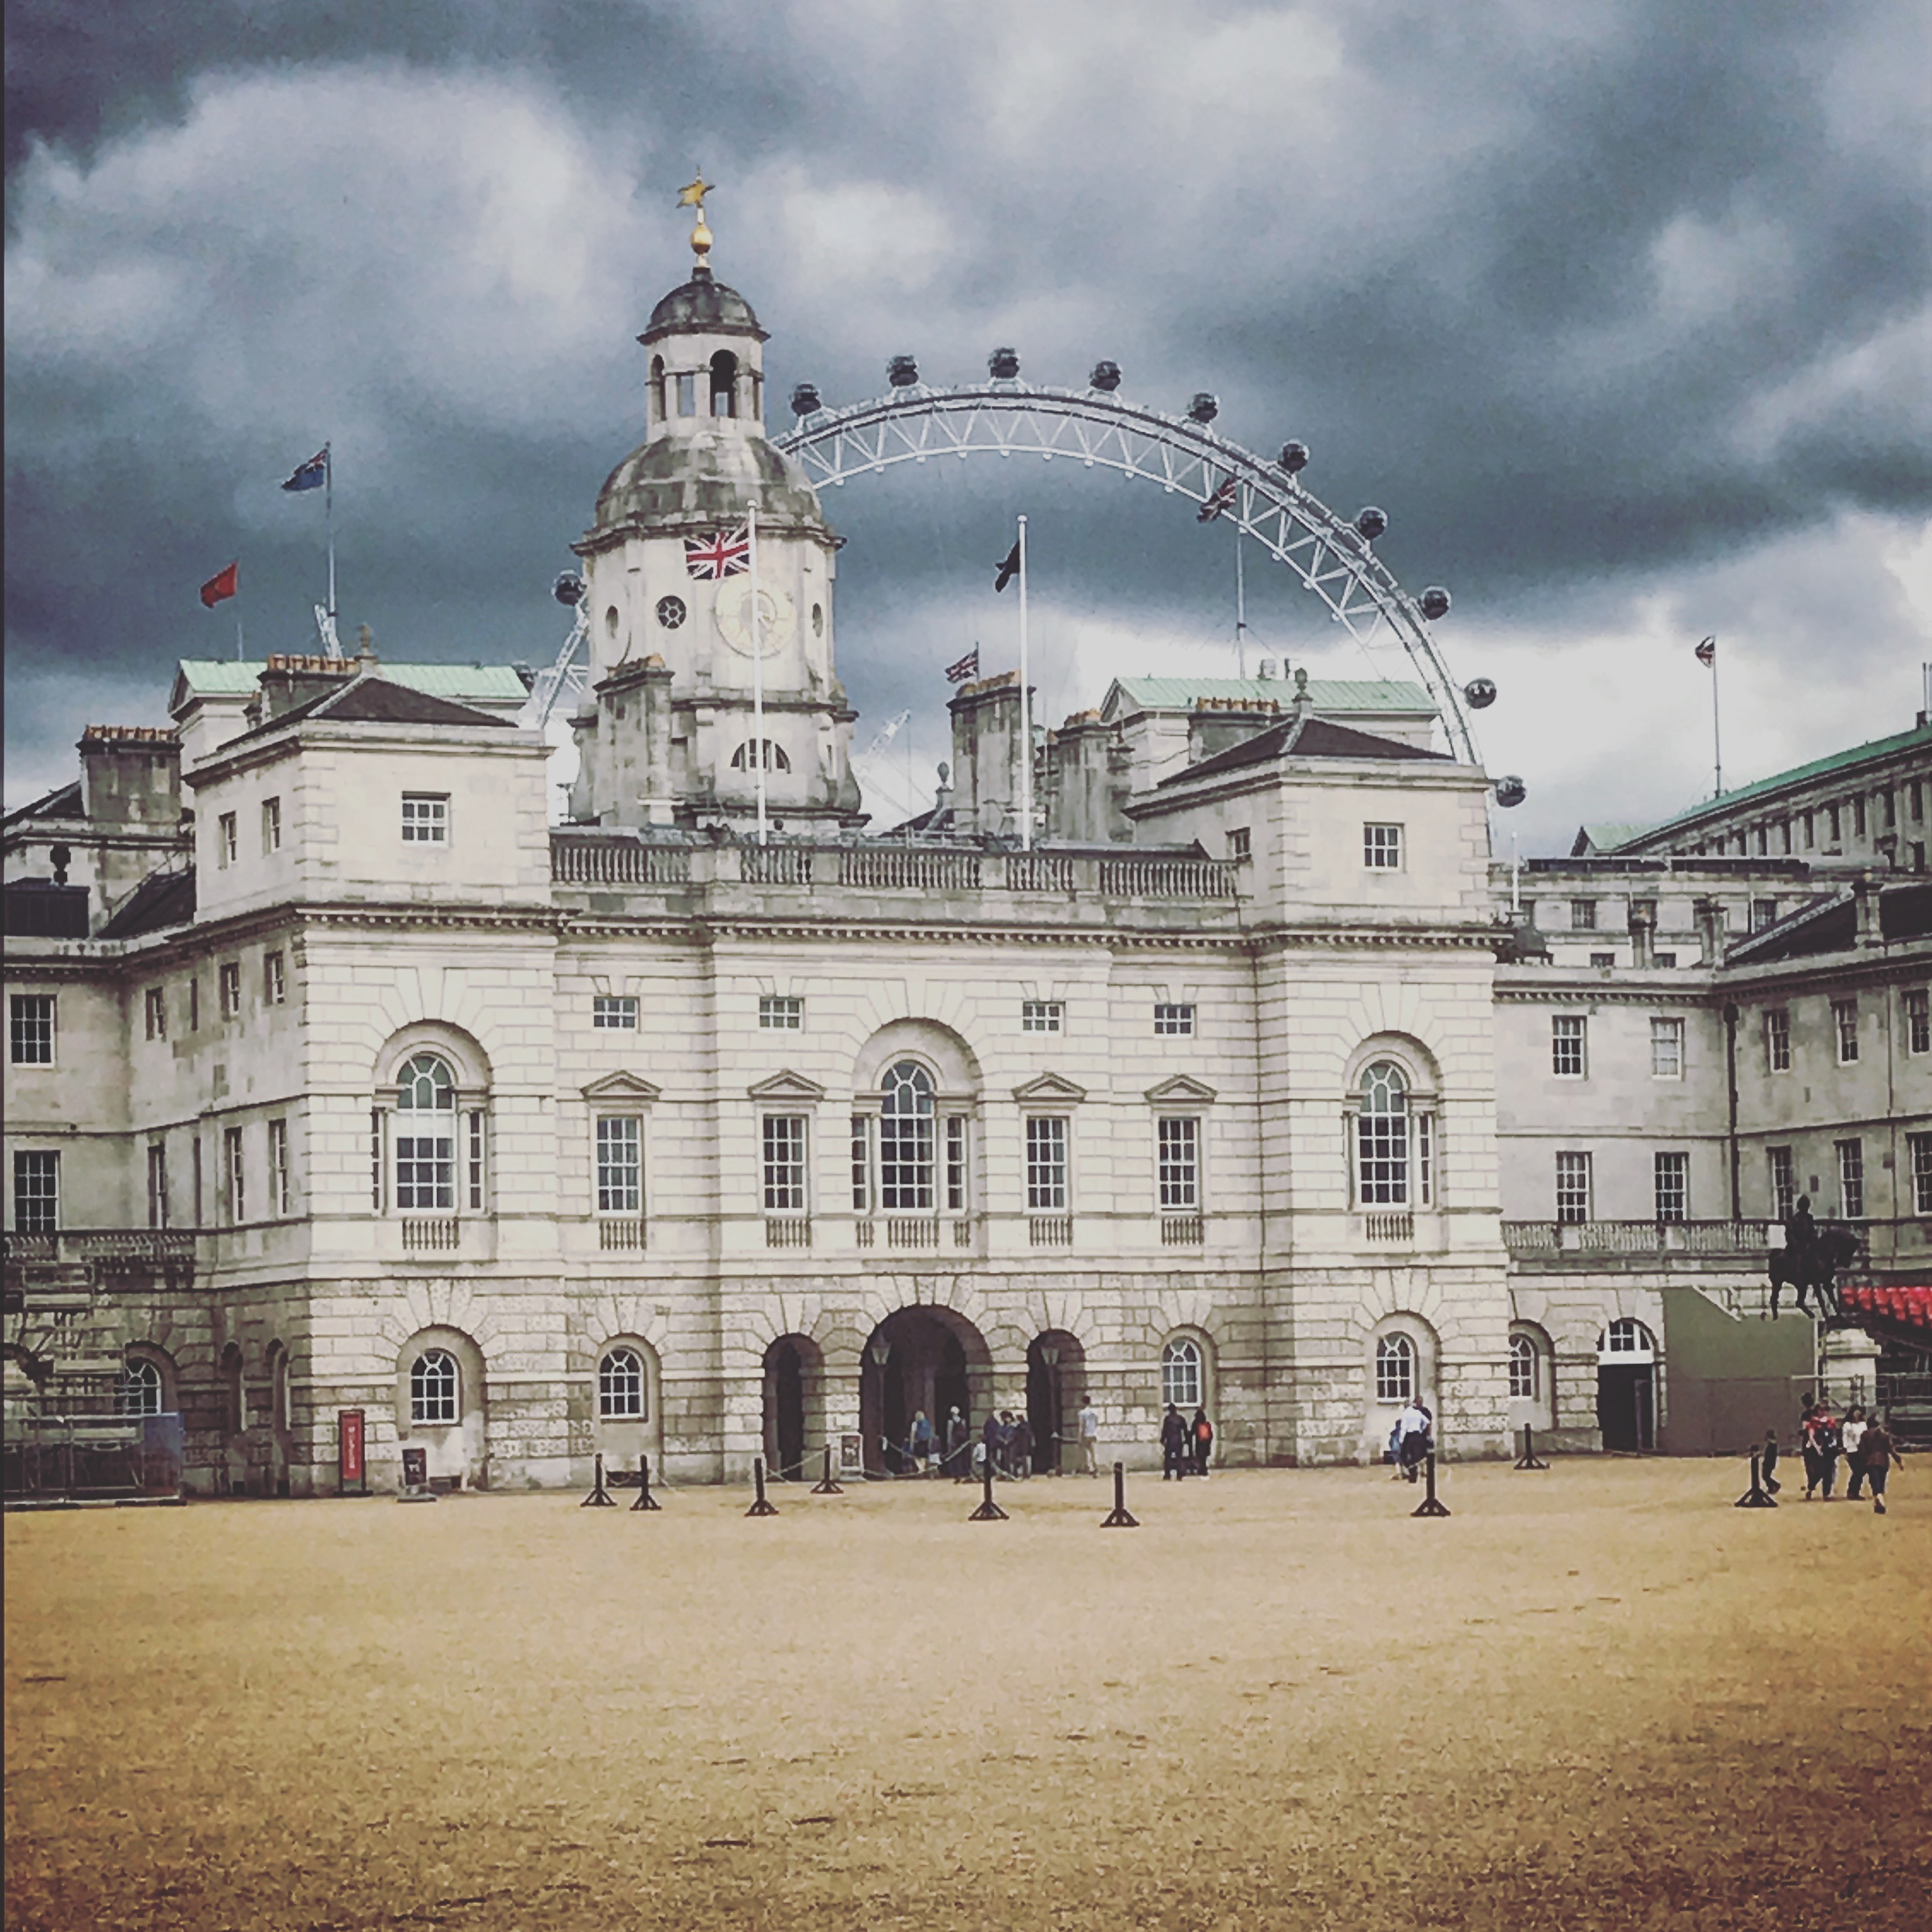 Free things to do in London - Take a walk to Horse Guards Parade